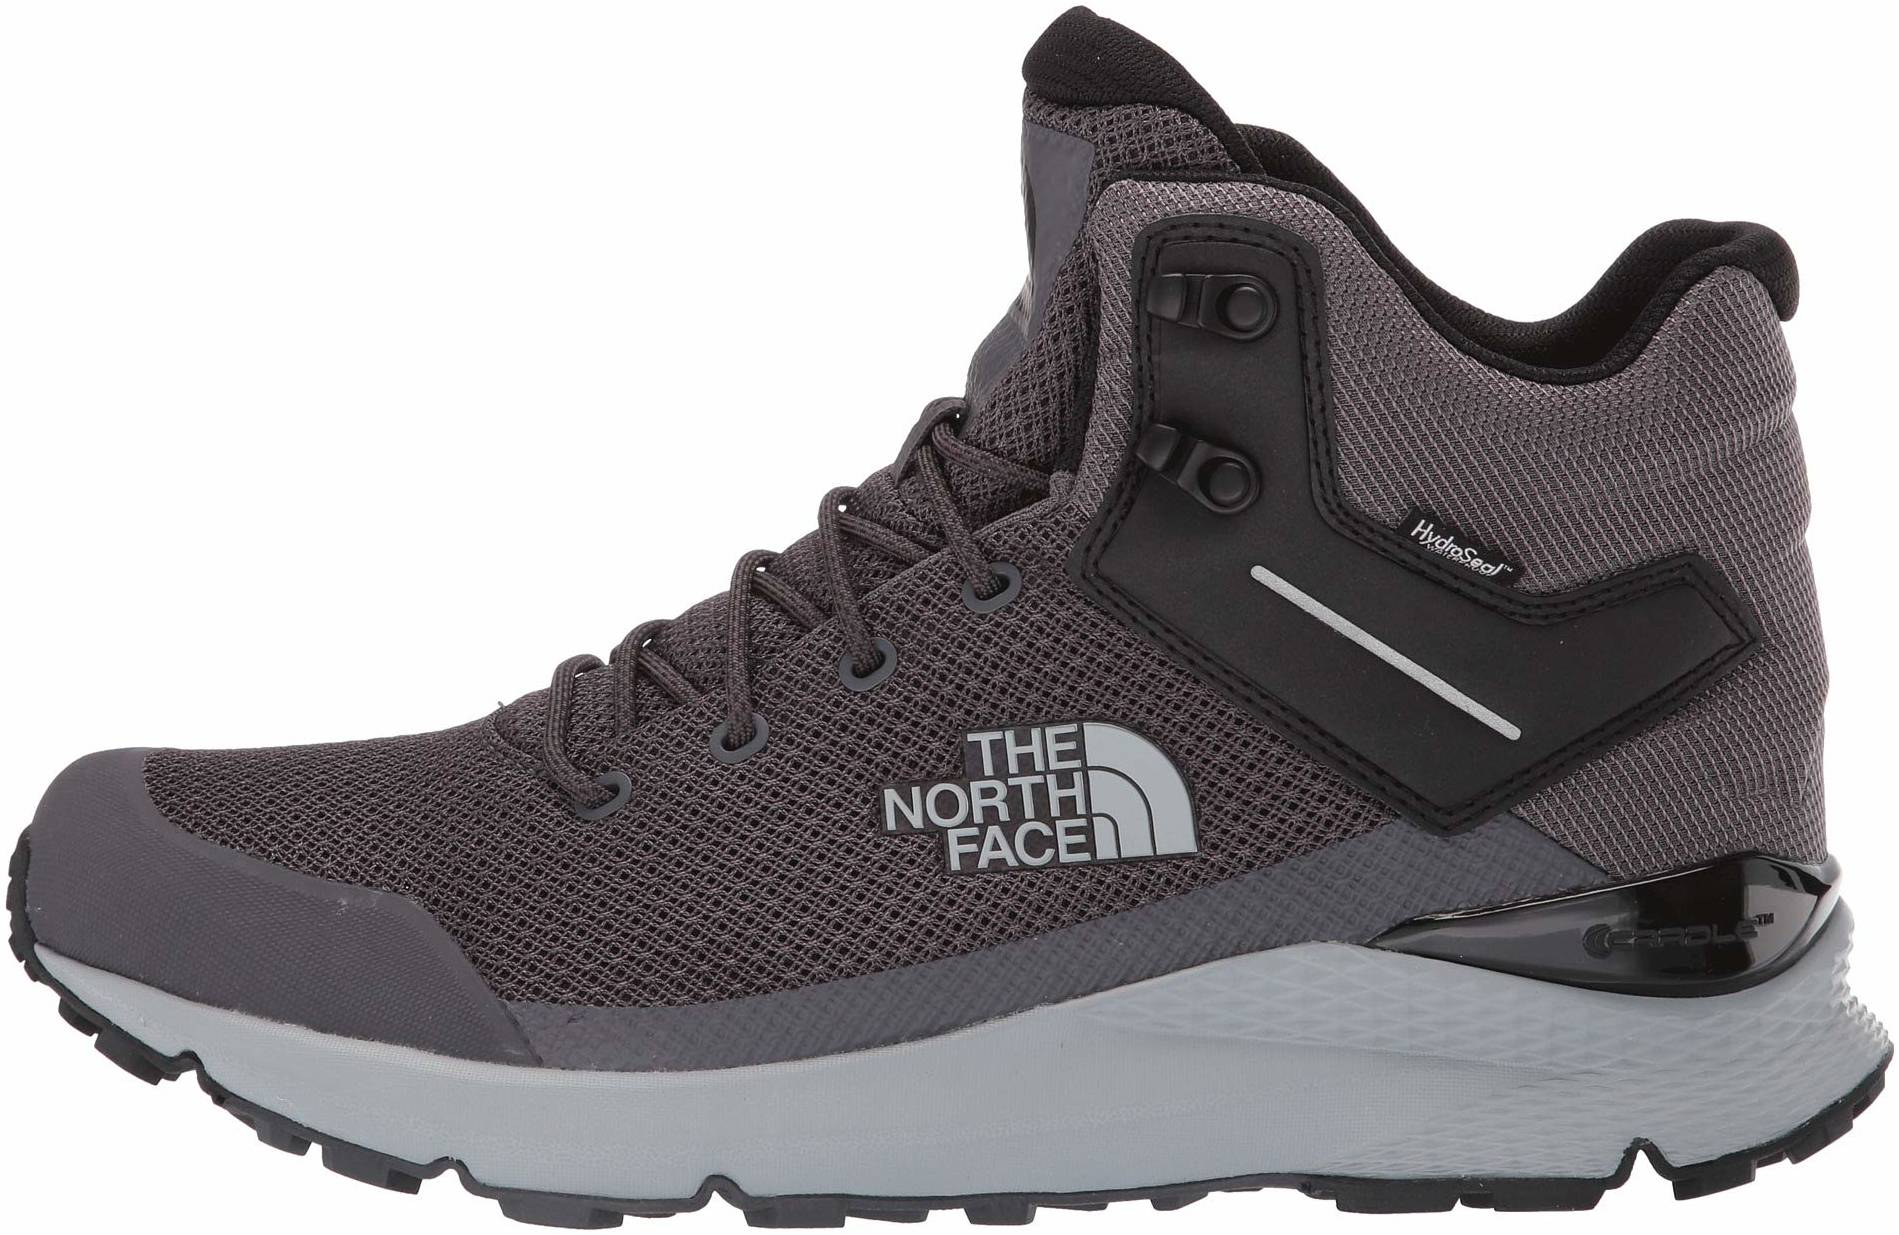 the north face men's vals waterproof hiking shoes